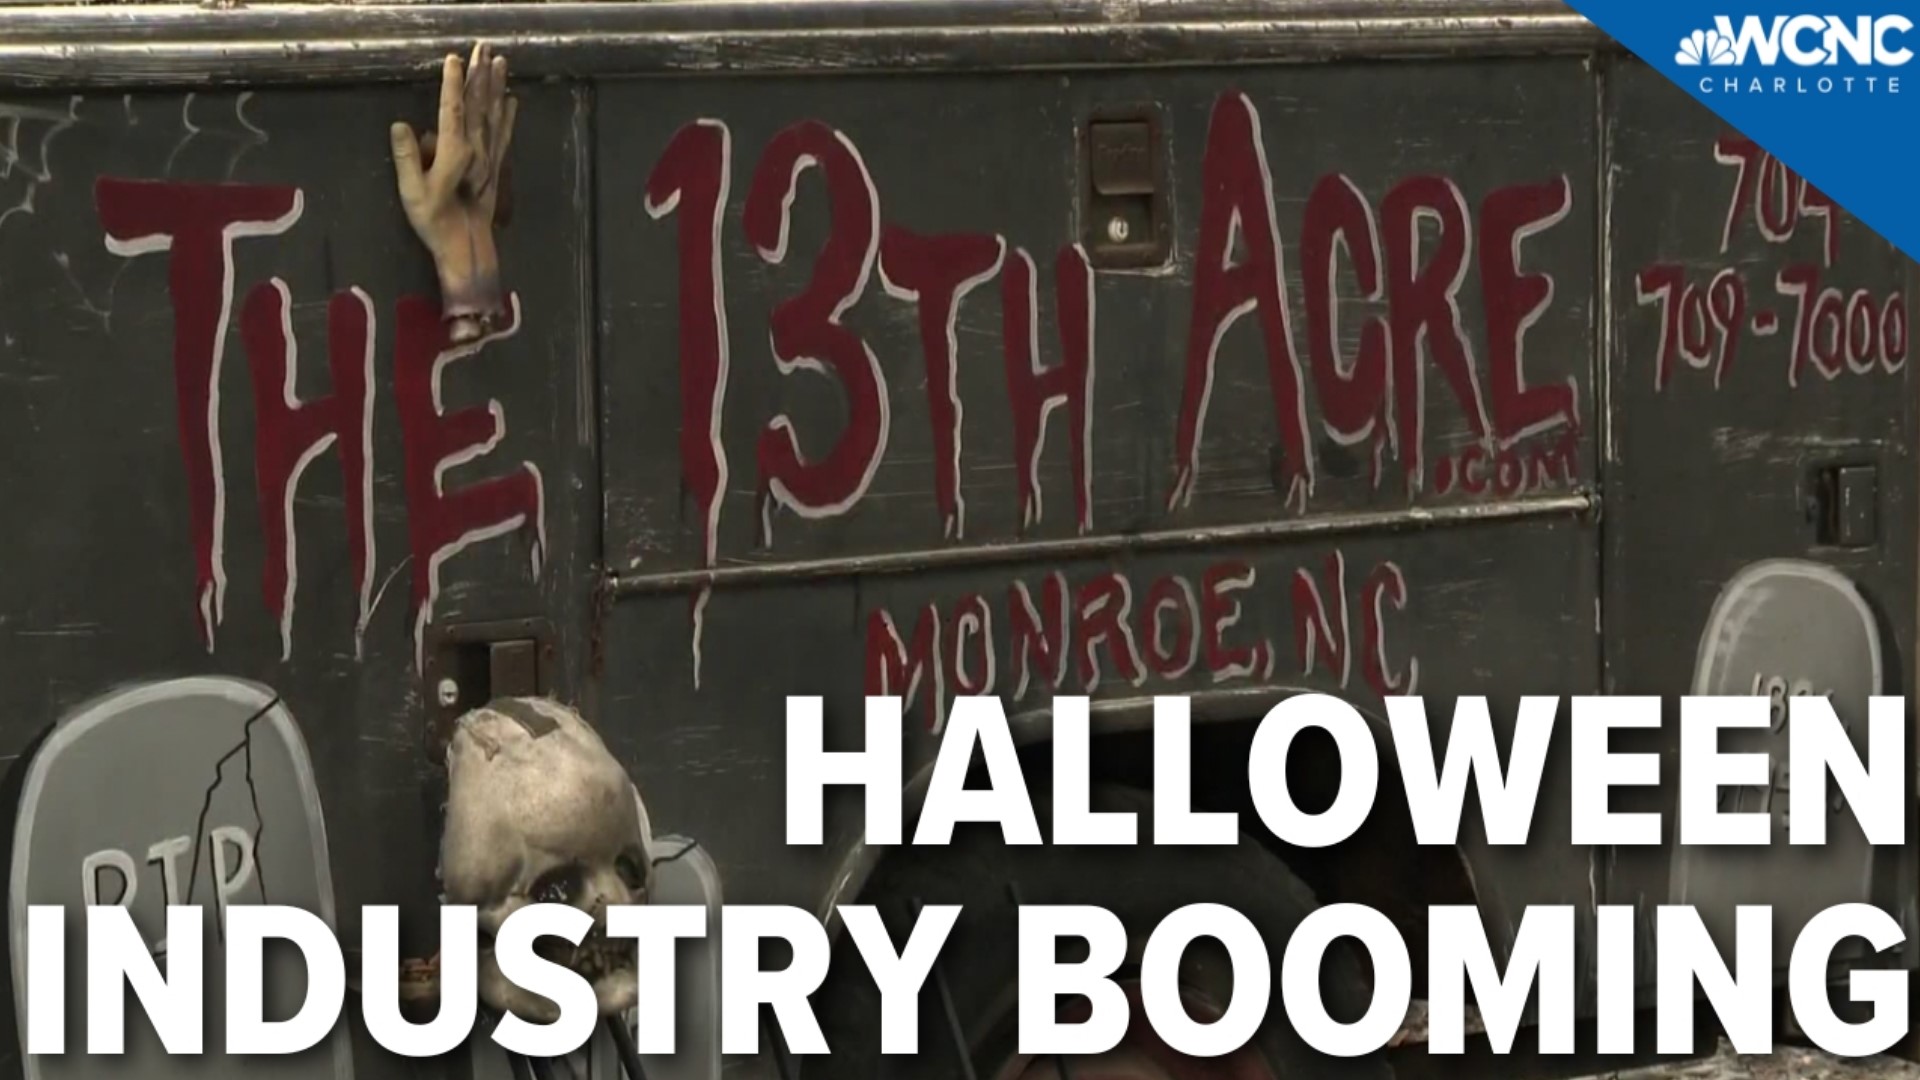 The Halloween industry is booming. Data from the National Retail Federation showed it's almost $11 billion and growing.